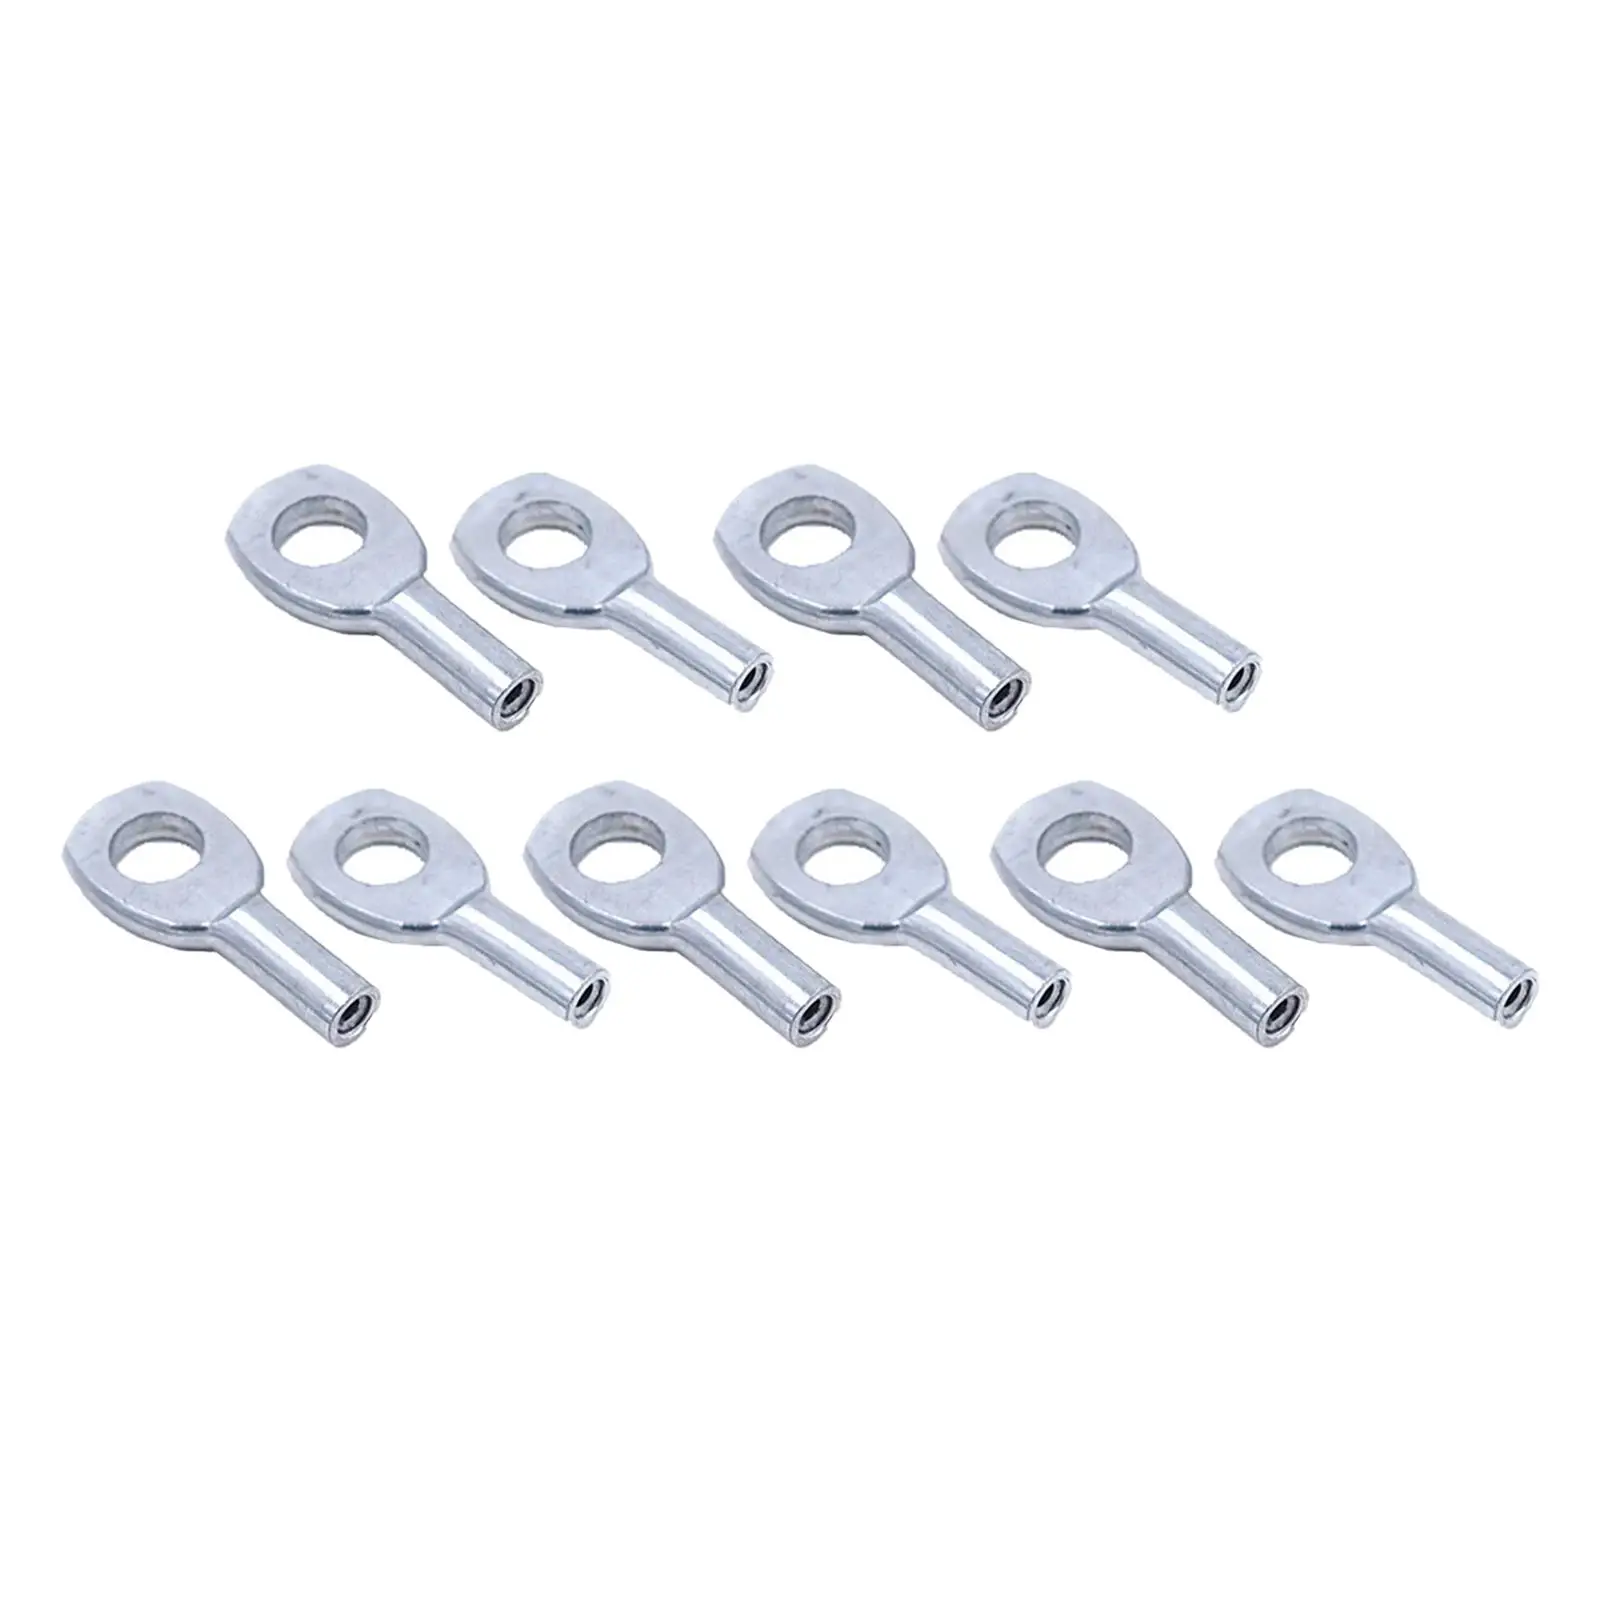 10 Pcs Steel Wire Rope Eyelets Accessories Terminals Wire Rope 2mm